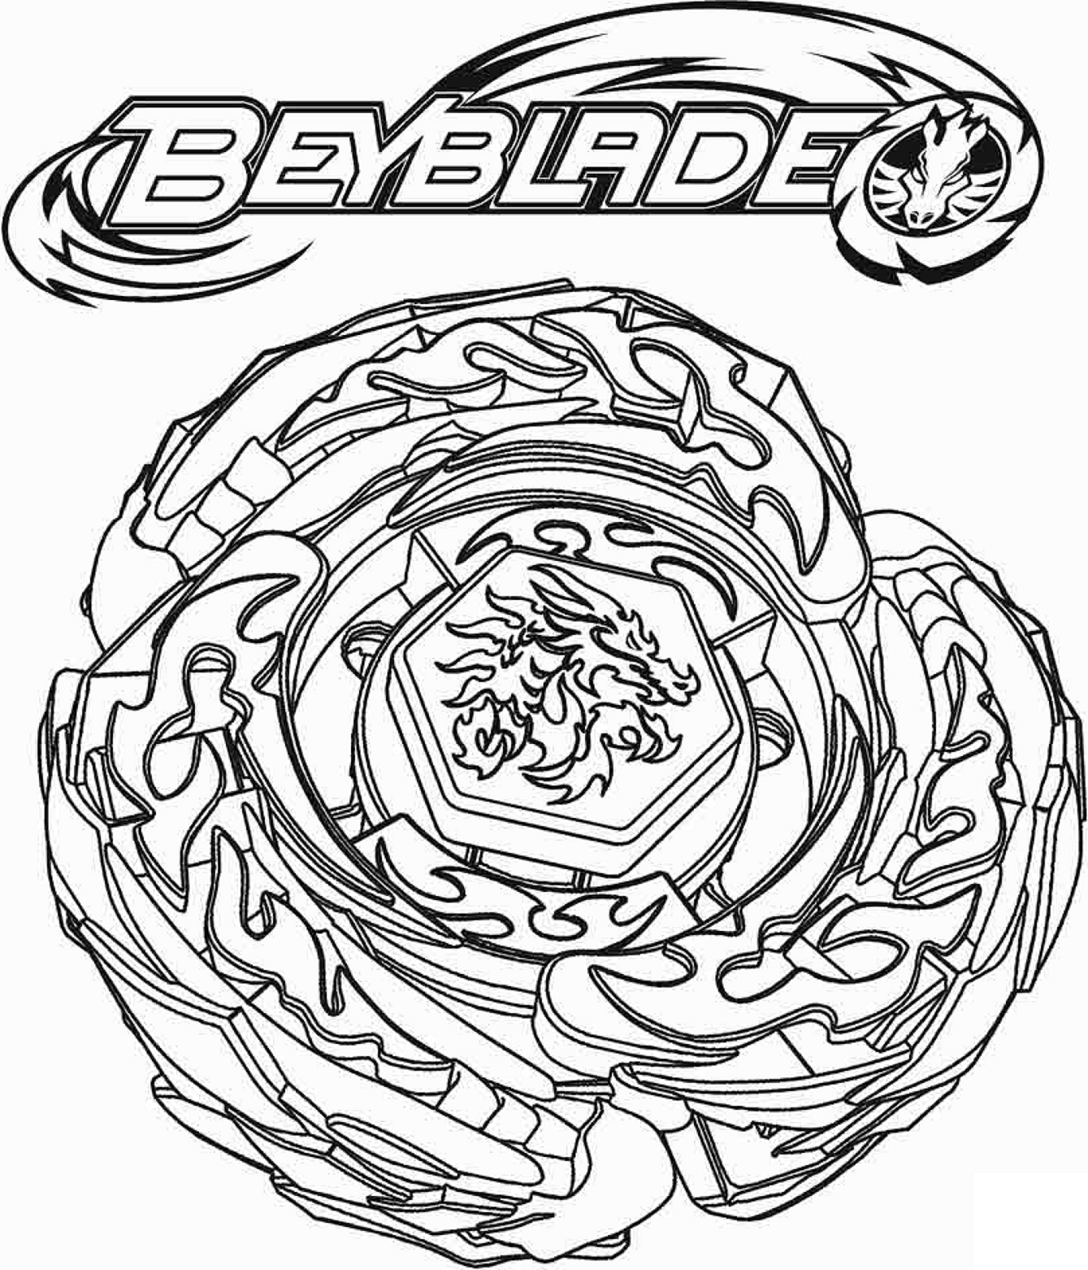 Beyblade Rock Leone Coloring Page - Free Printable Coloring Pages for Kids